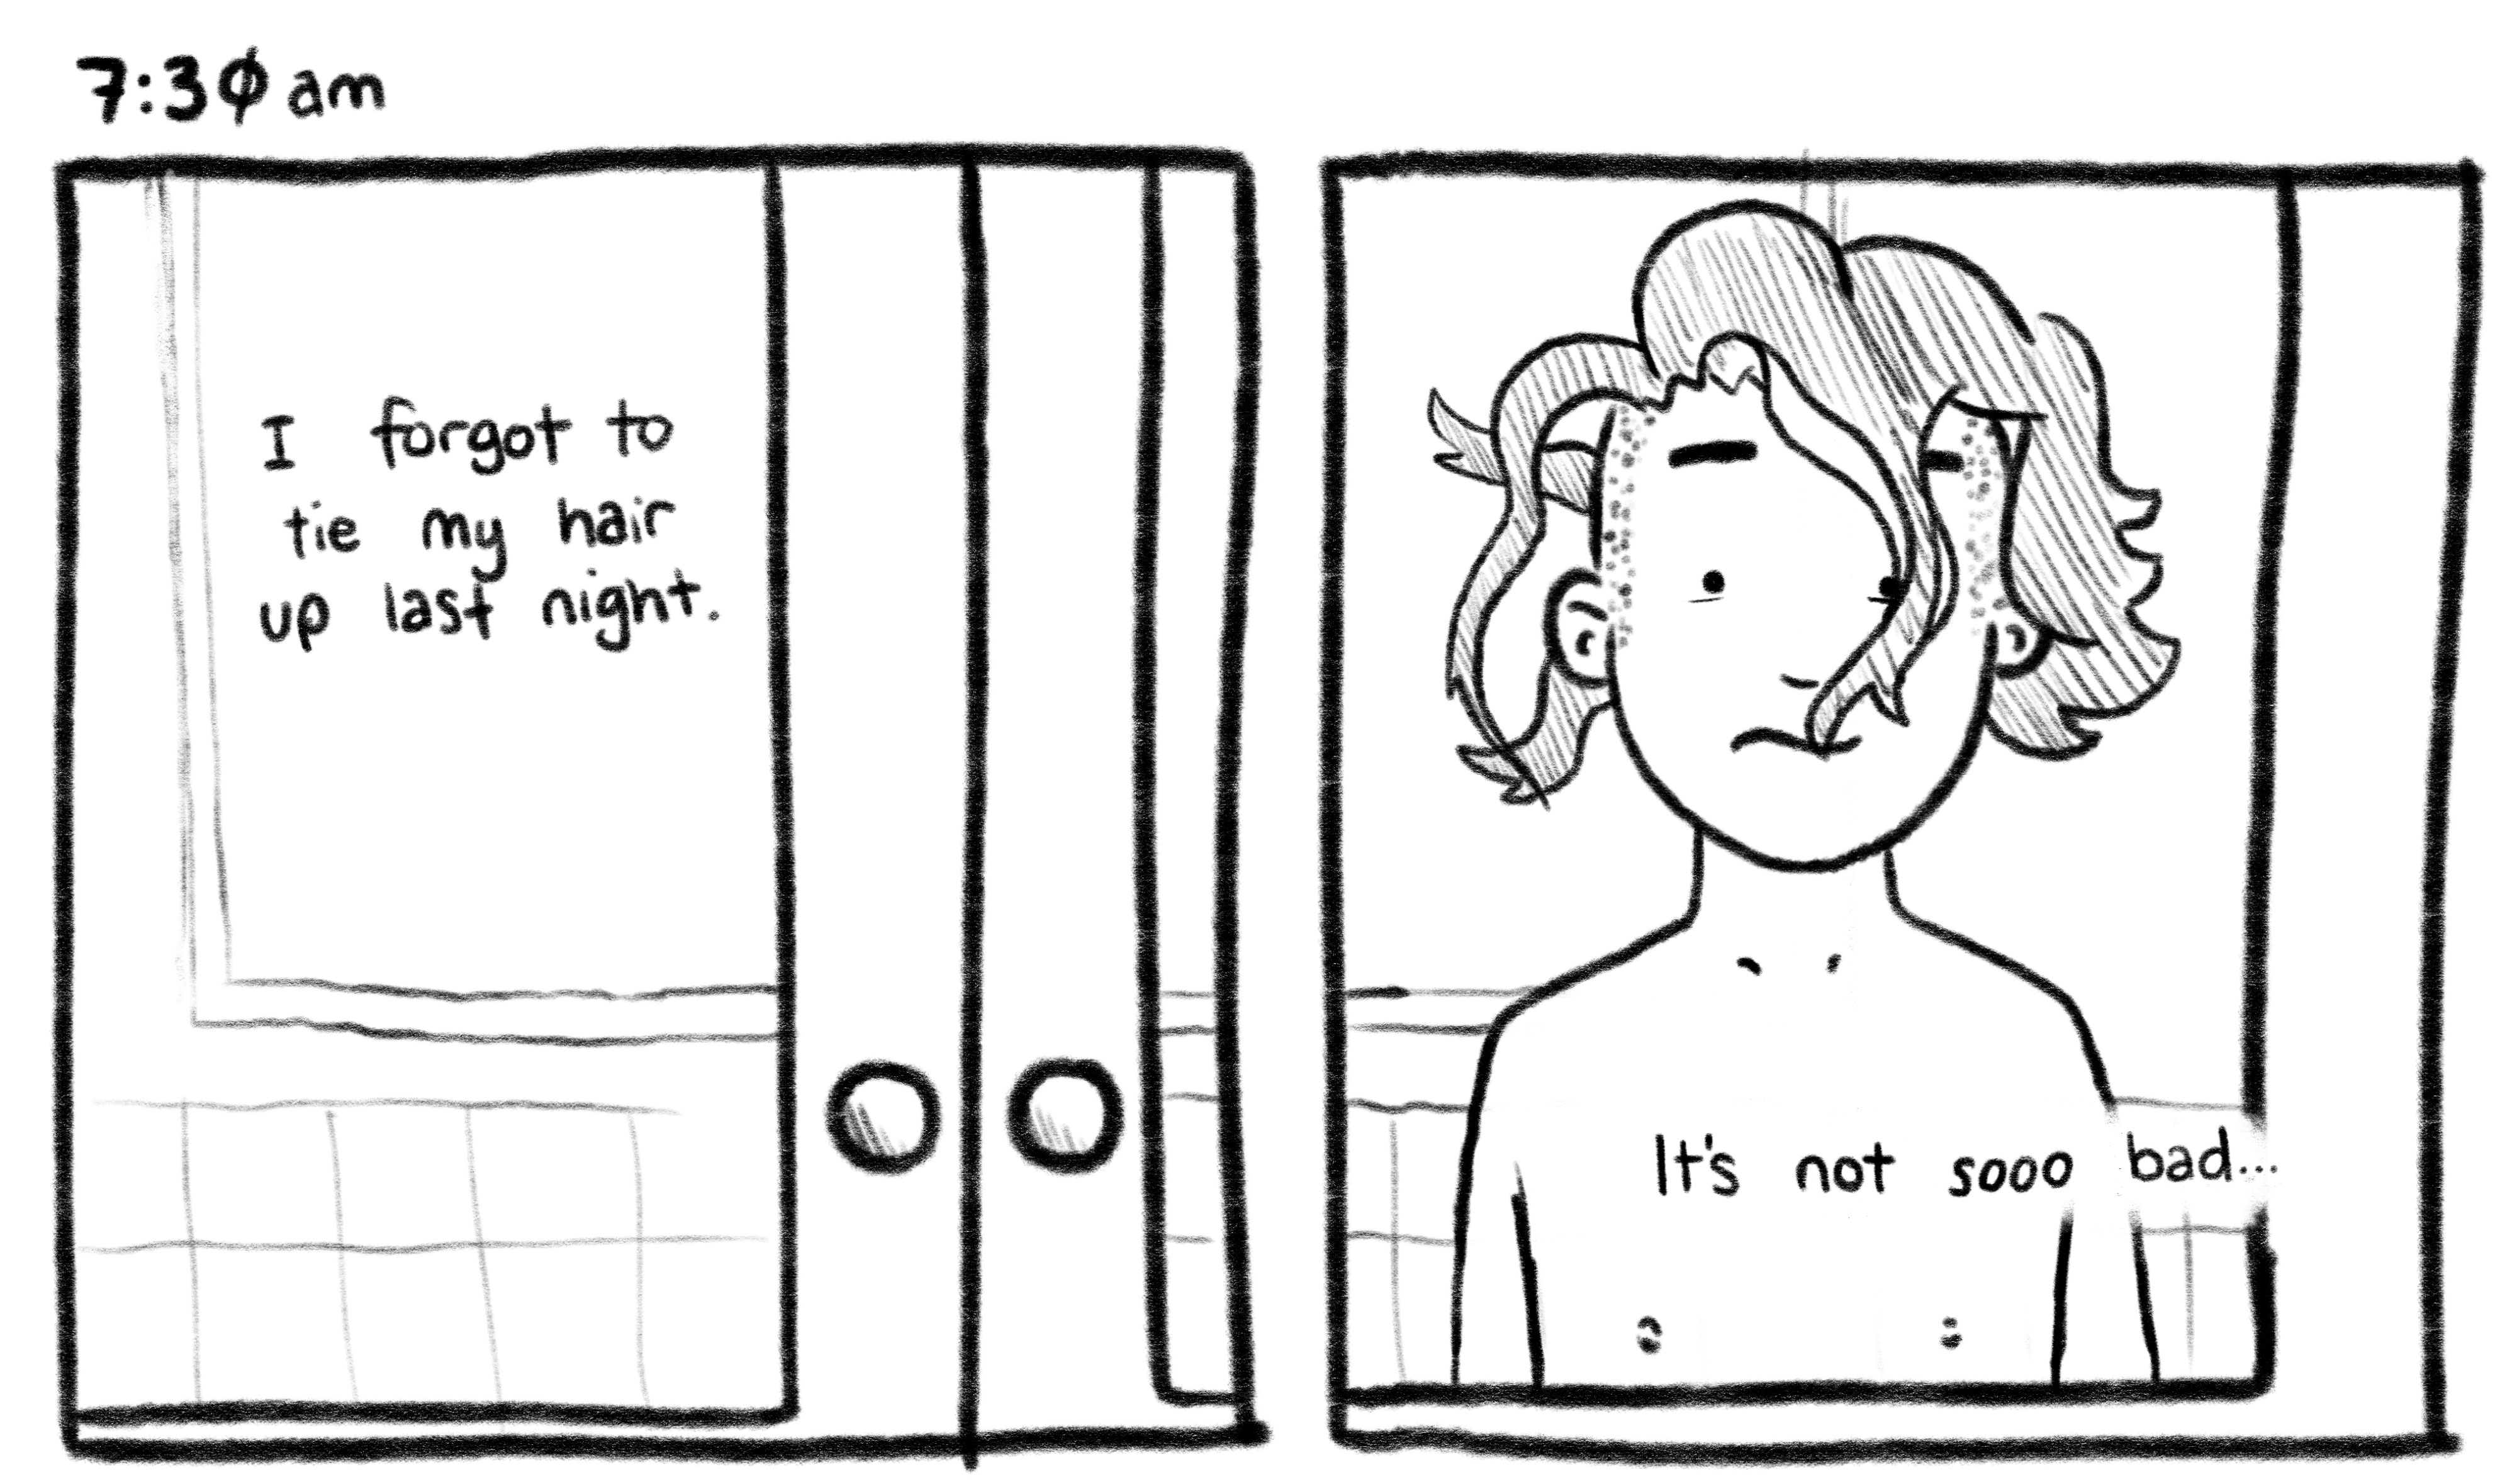 7:30am; Panel 1: Close up of a bathroom cabinet. Jelly V.O.: I forgot to tie my hair up last night. Panel 2: Jelly is looking in the mirror, his long hair is sticking out in every possible direction. Jelly V.O.: It's not sooo bad...